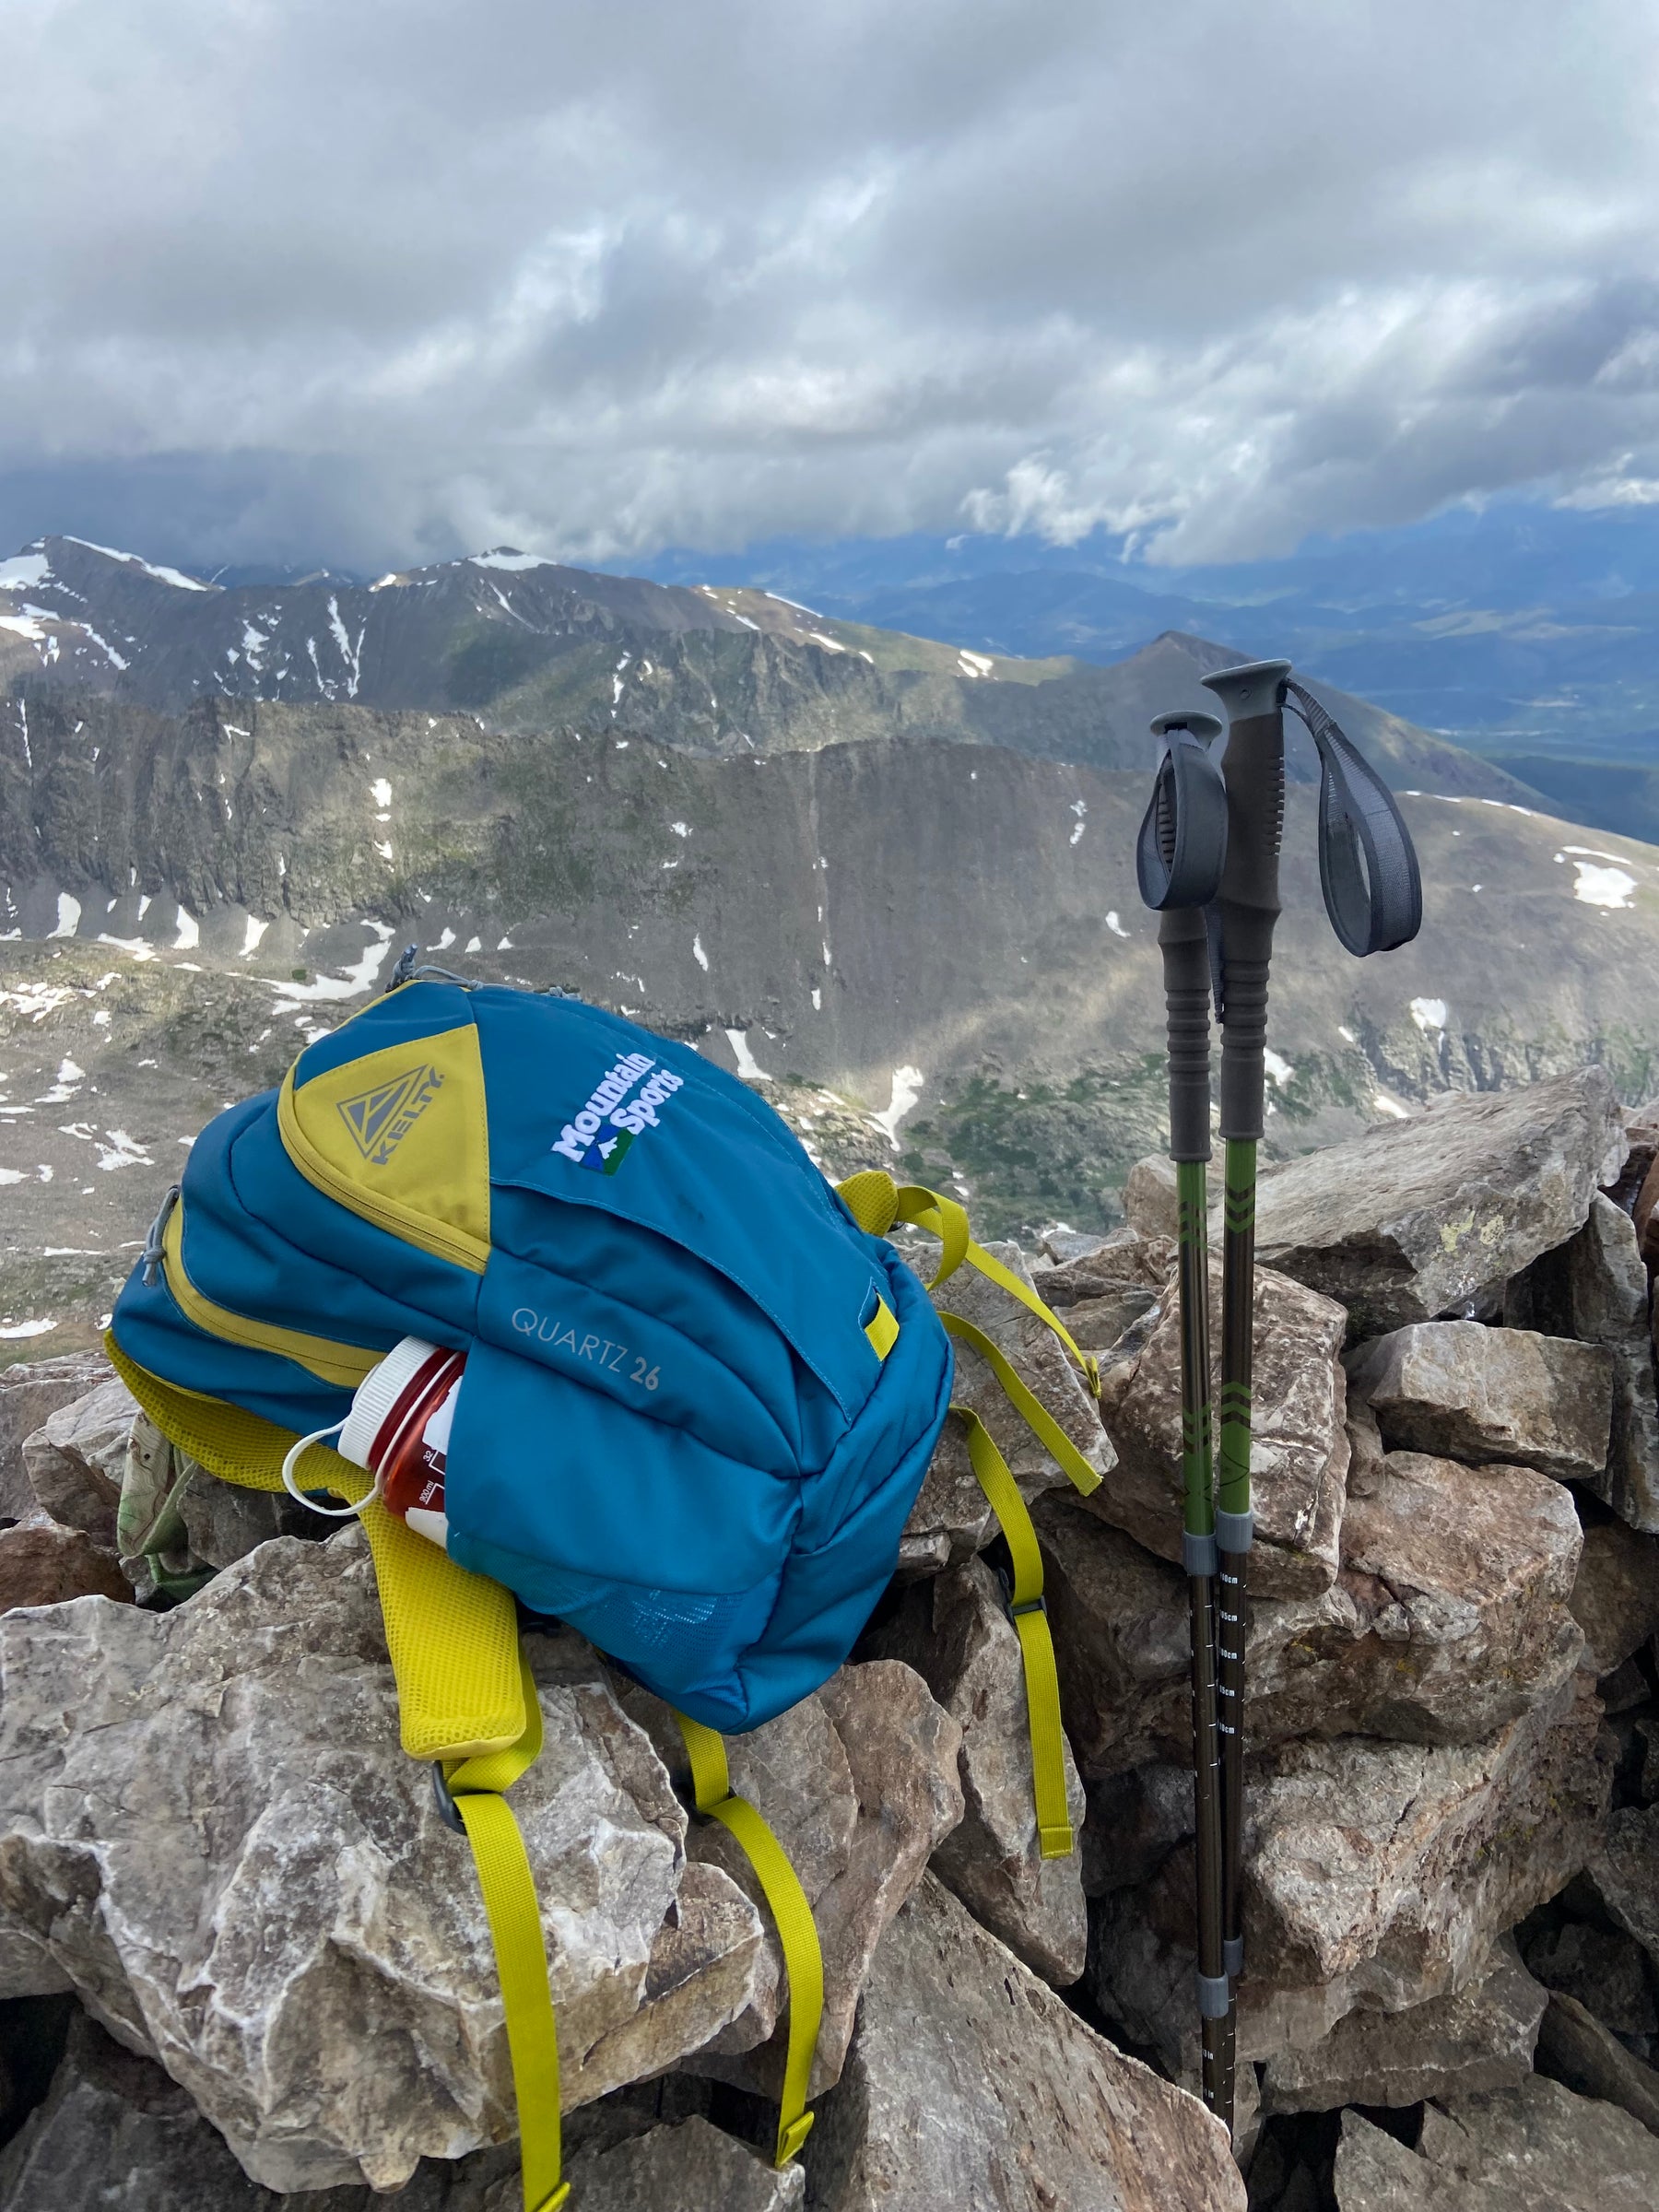 Trip Report: Hiking Quandary Peak by Emory Dyck